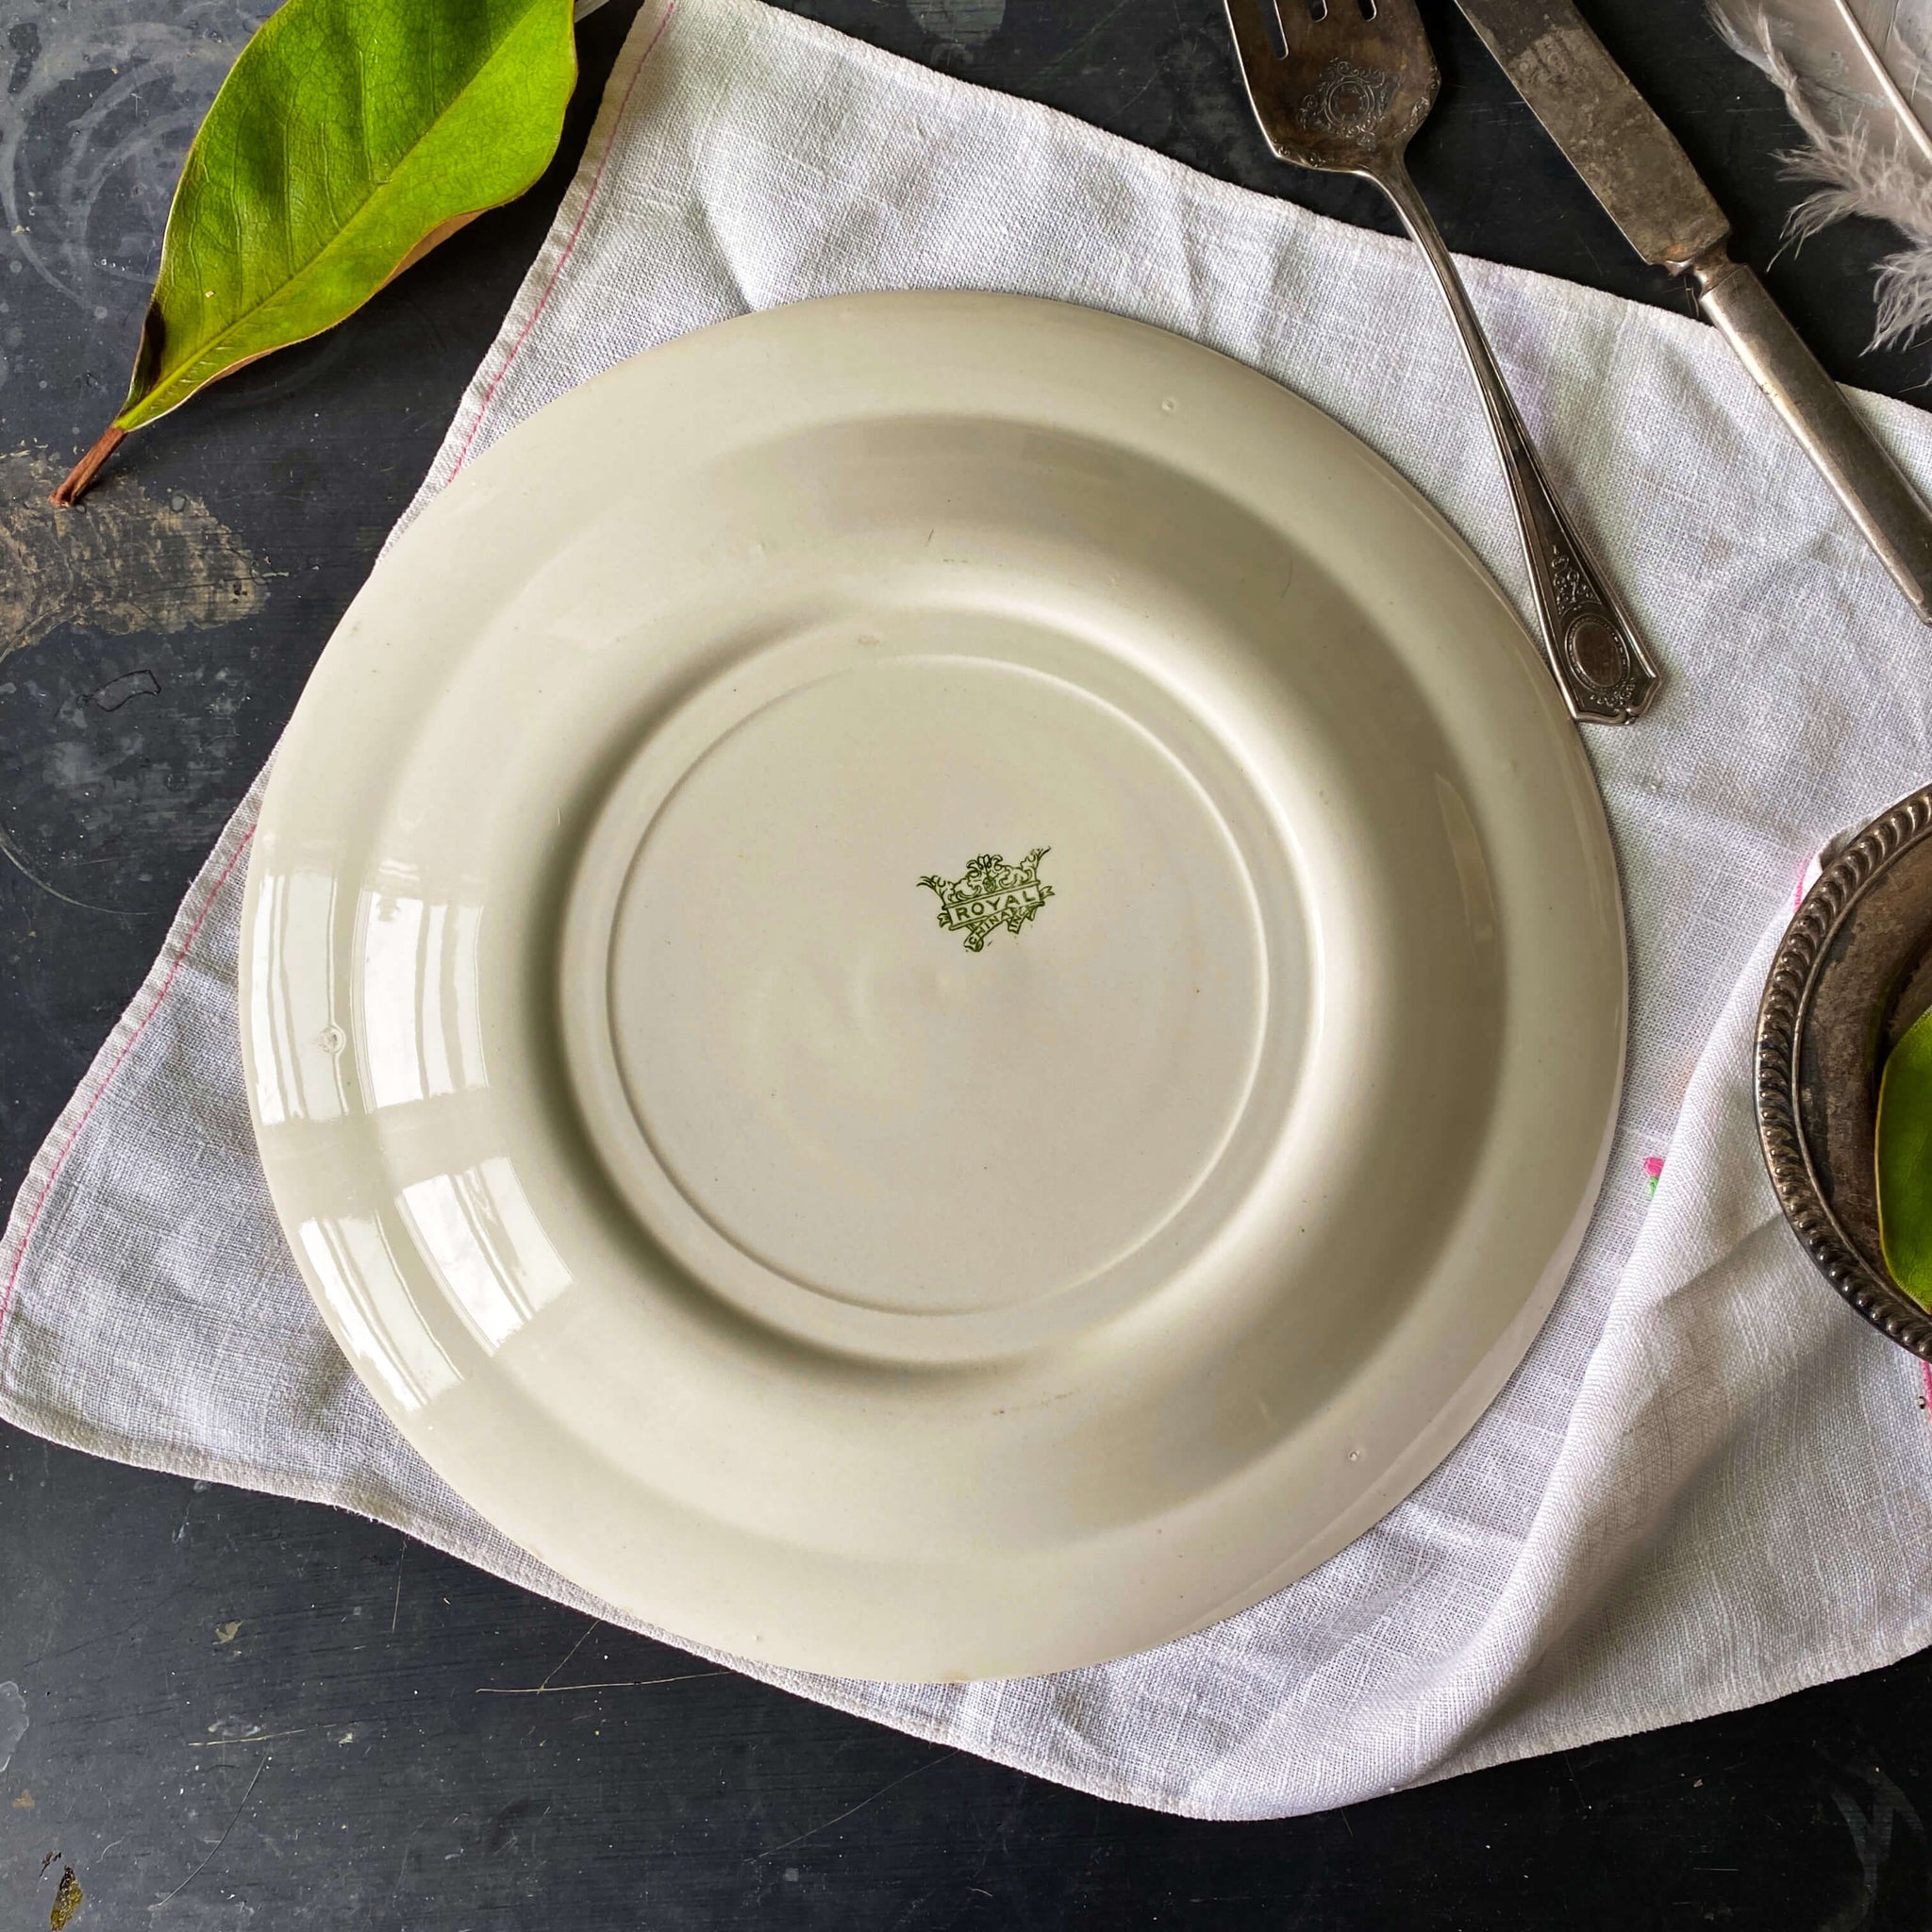 Vintage Royal China Chop Plate - Green Floral Bird Pattern circa 1954 - RESERVED for Christine